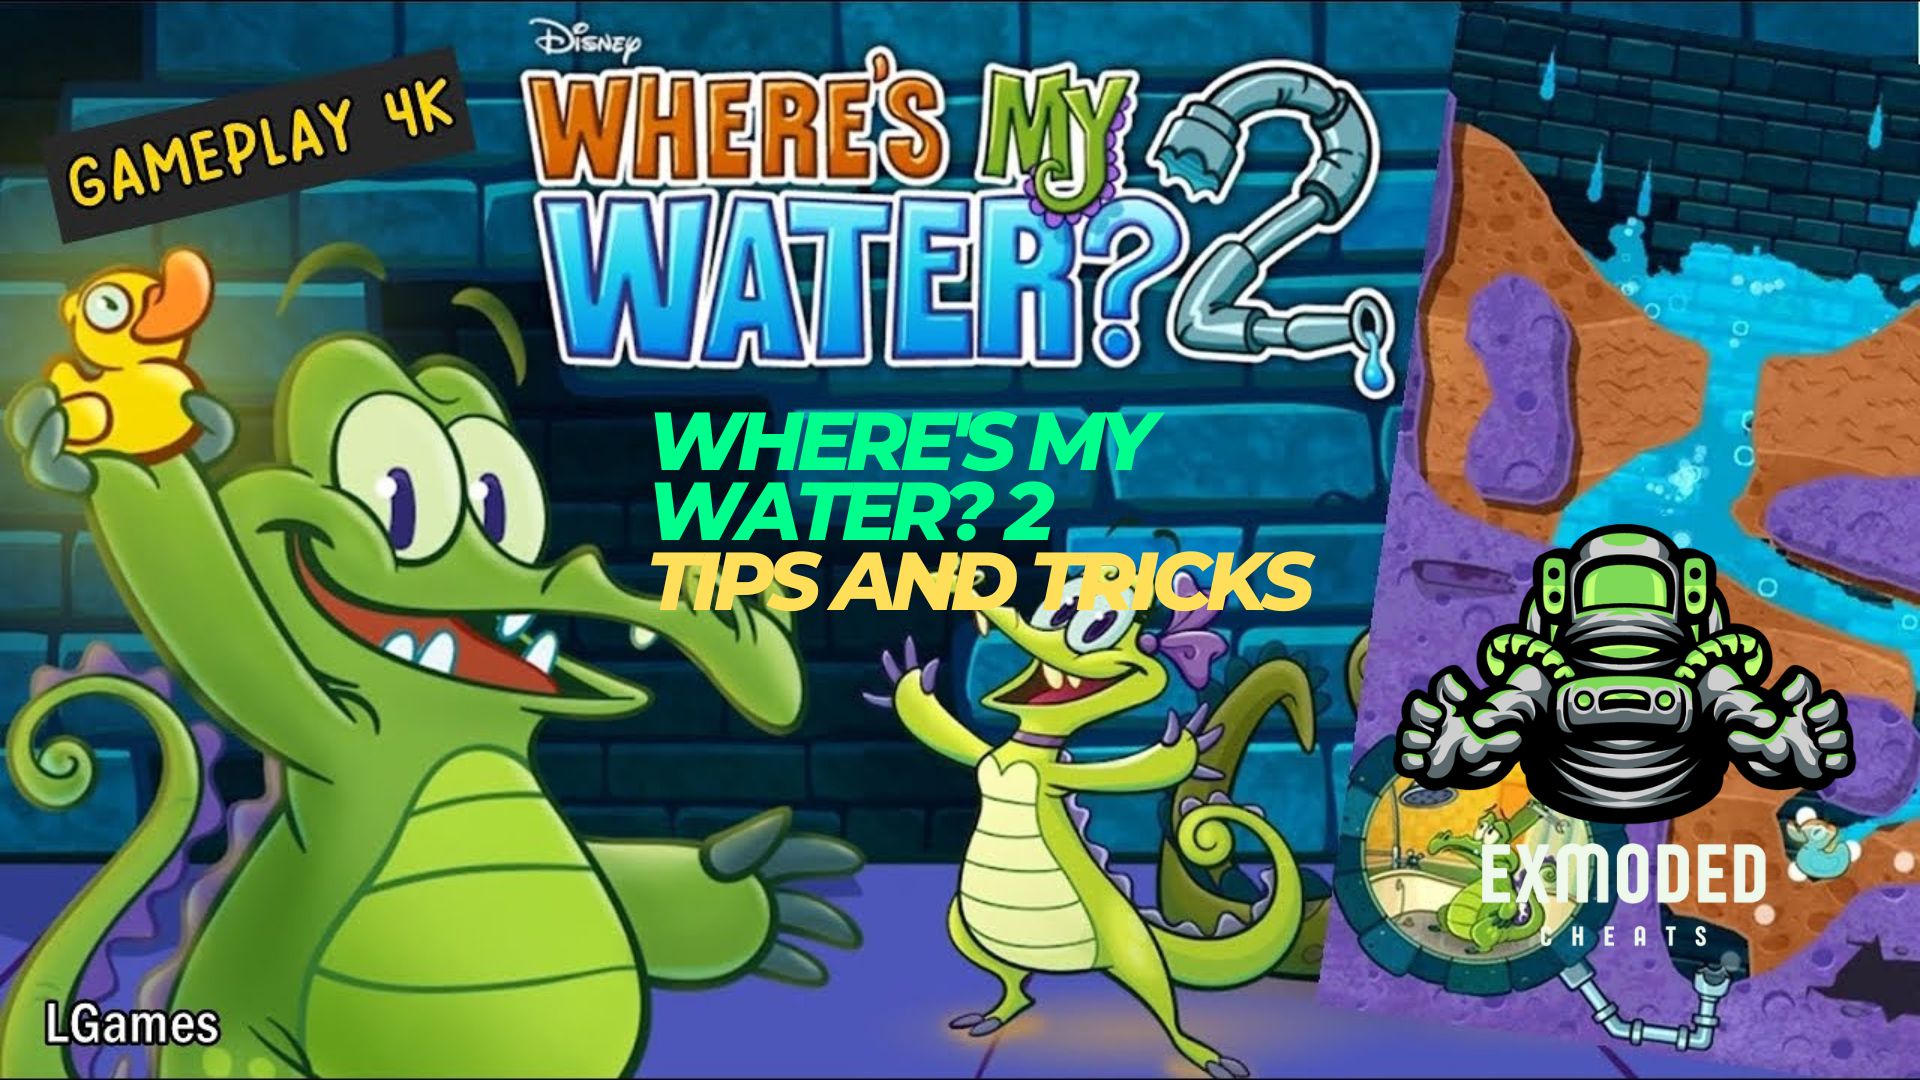 Where's My Water 2 tips and tricks